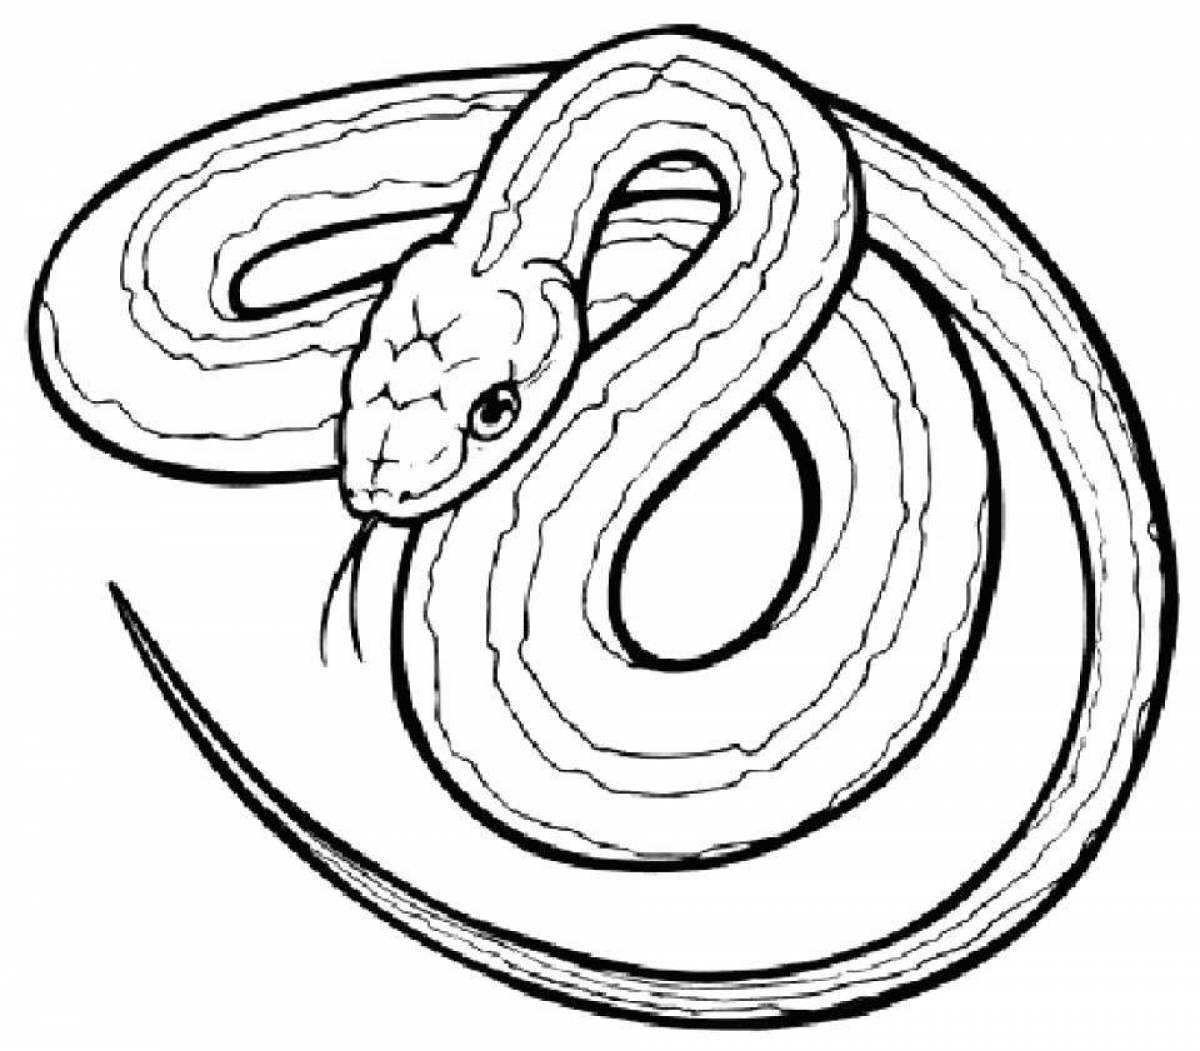 Adorable snake coloring page for toddlers